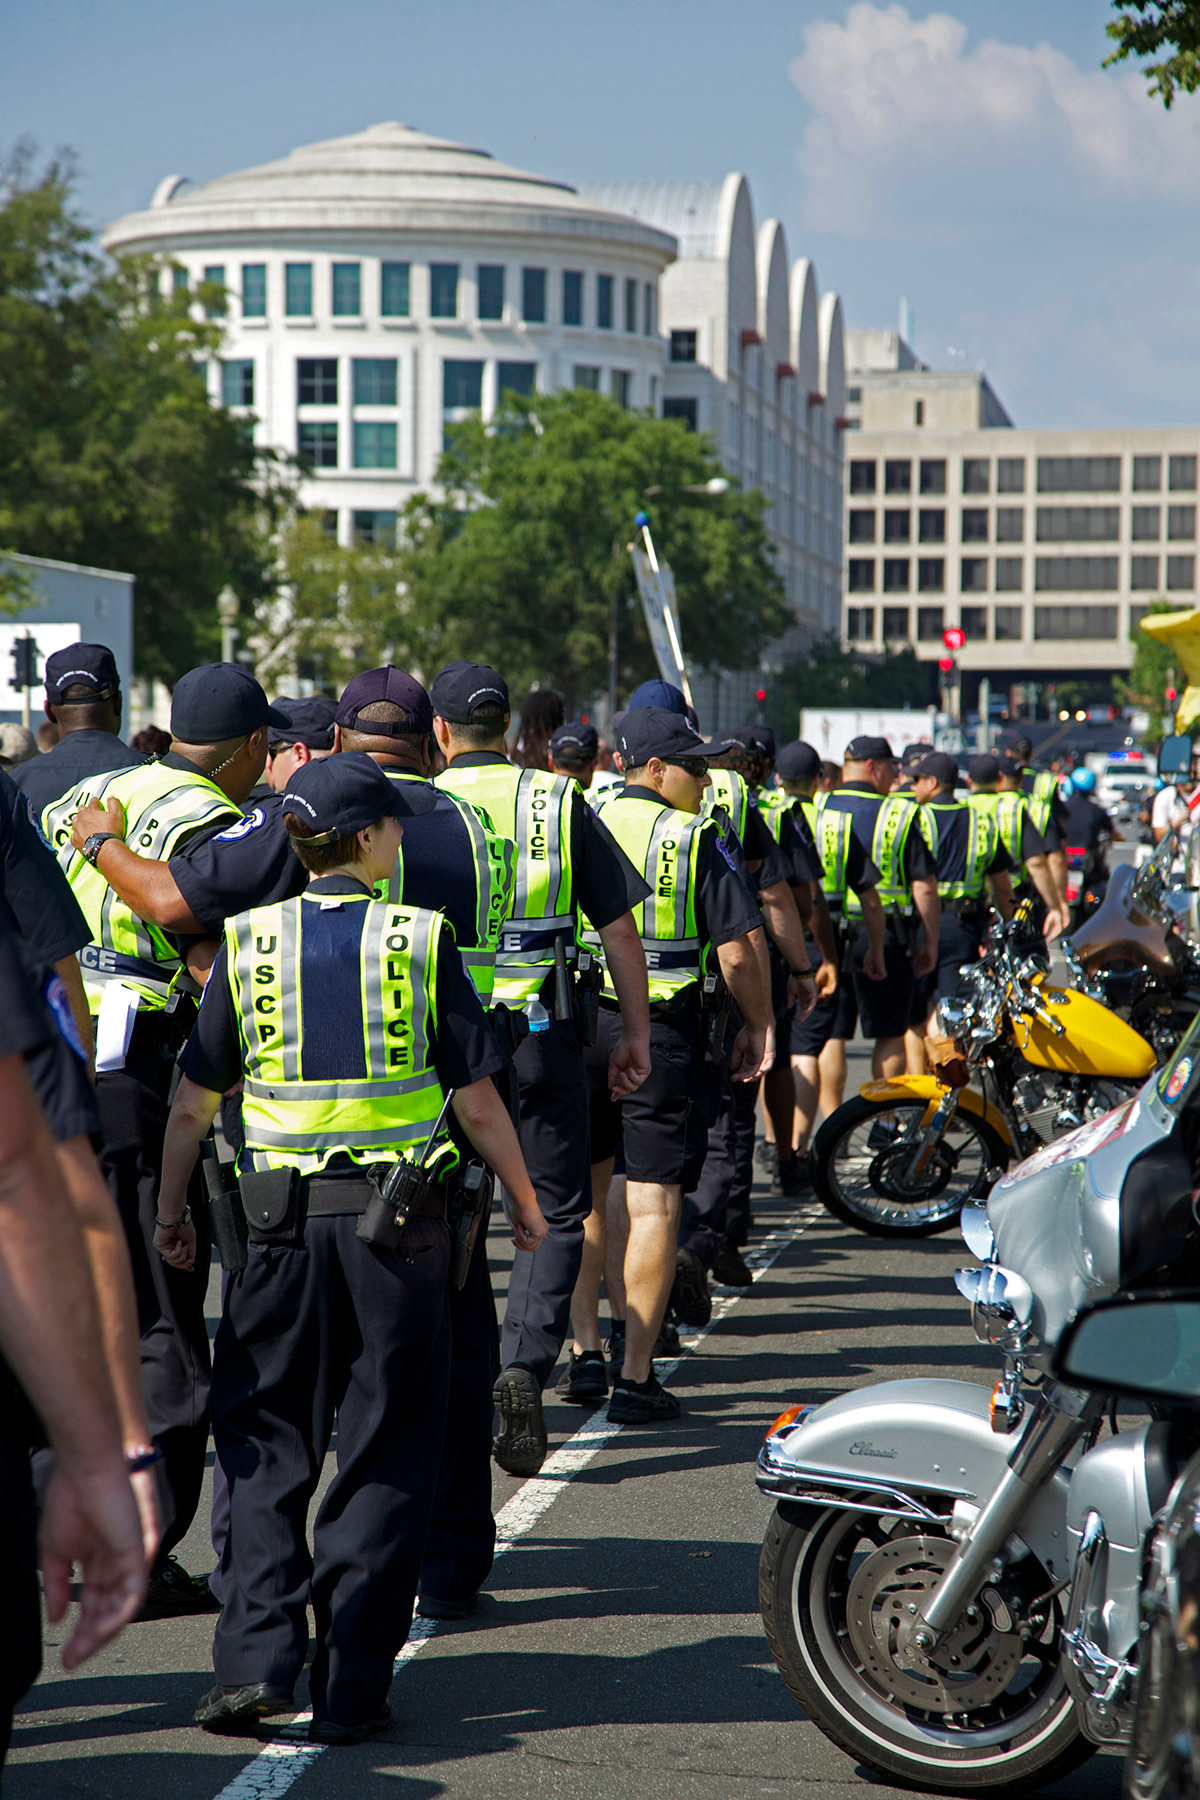 september 11th march protest rally National Mall Constitution Avenue washington dc police bikers Activists Two Million Bikers united states Capitol portrait Caitlin Faw